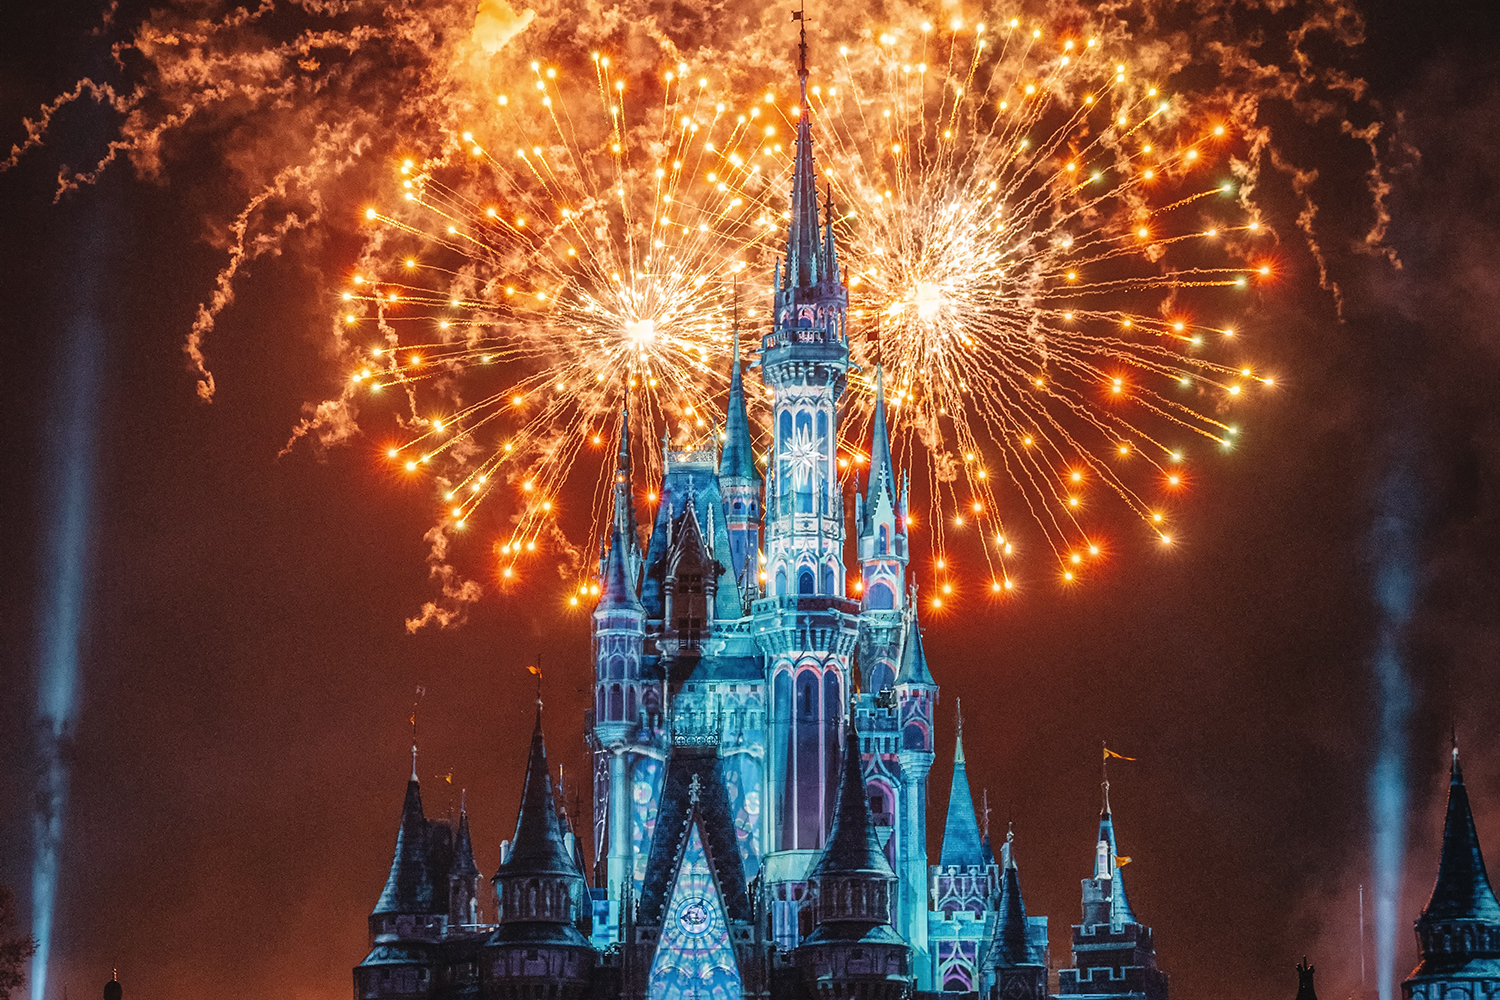 A photograph of the iconic Disney caslte against an explosion of orange fireworks